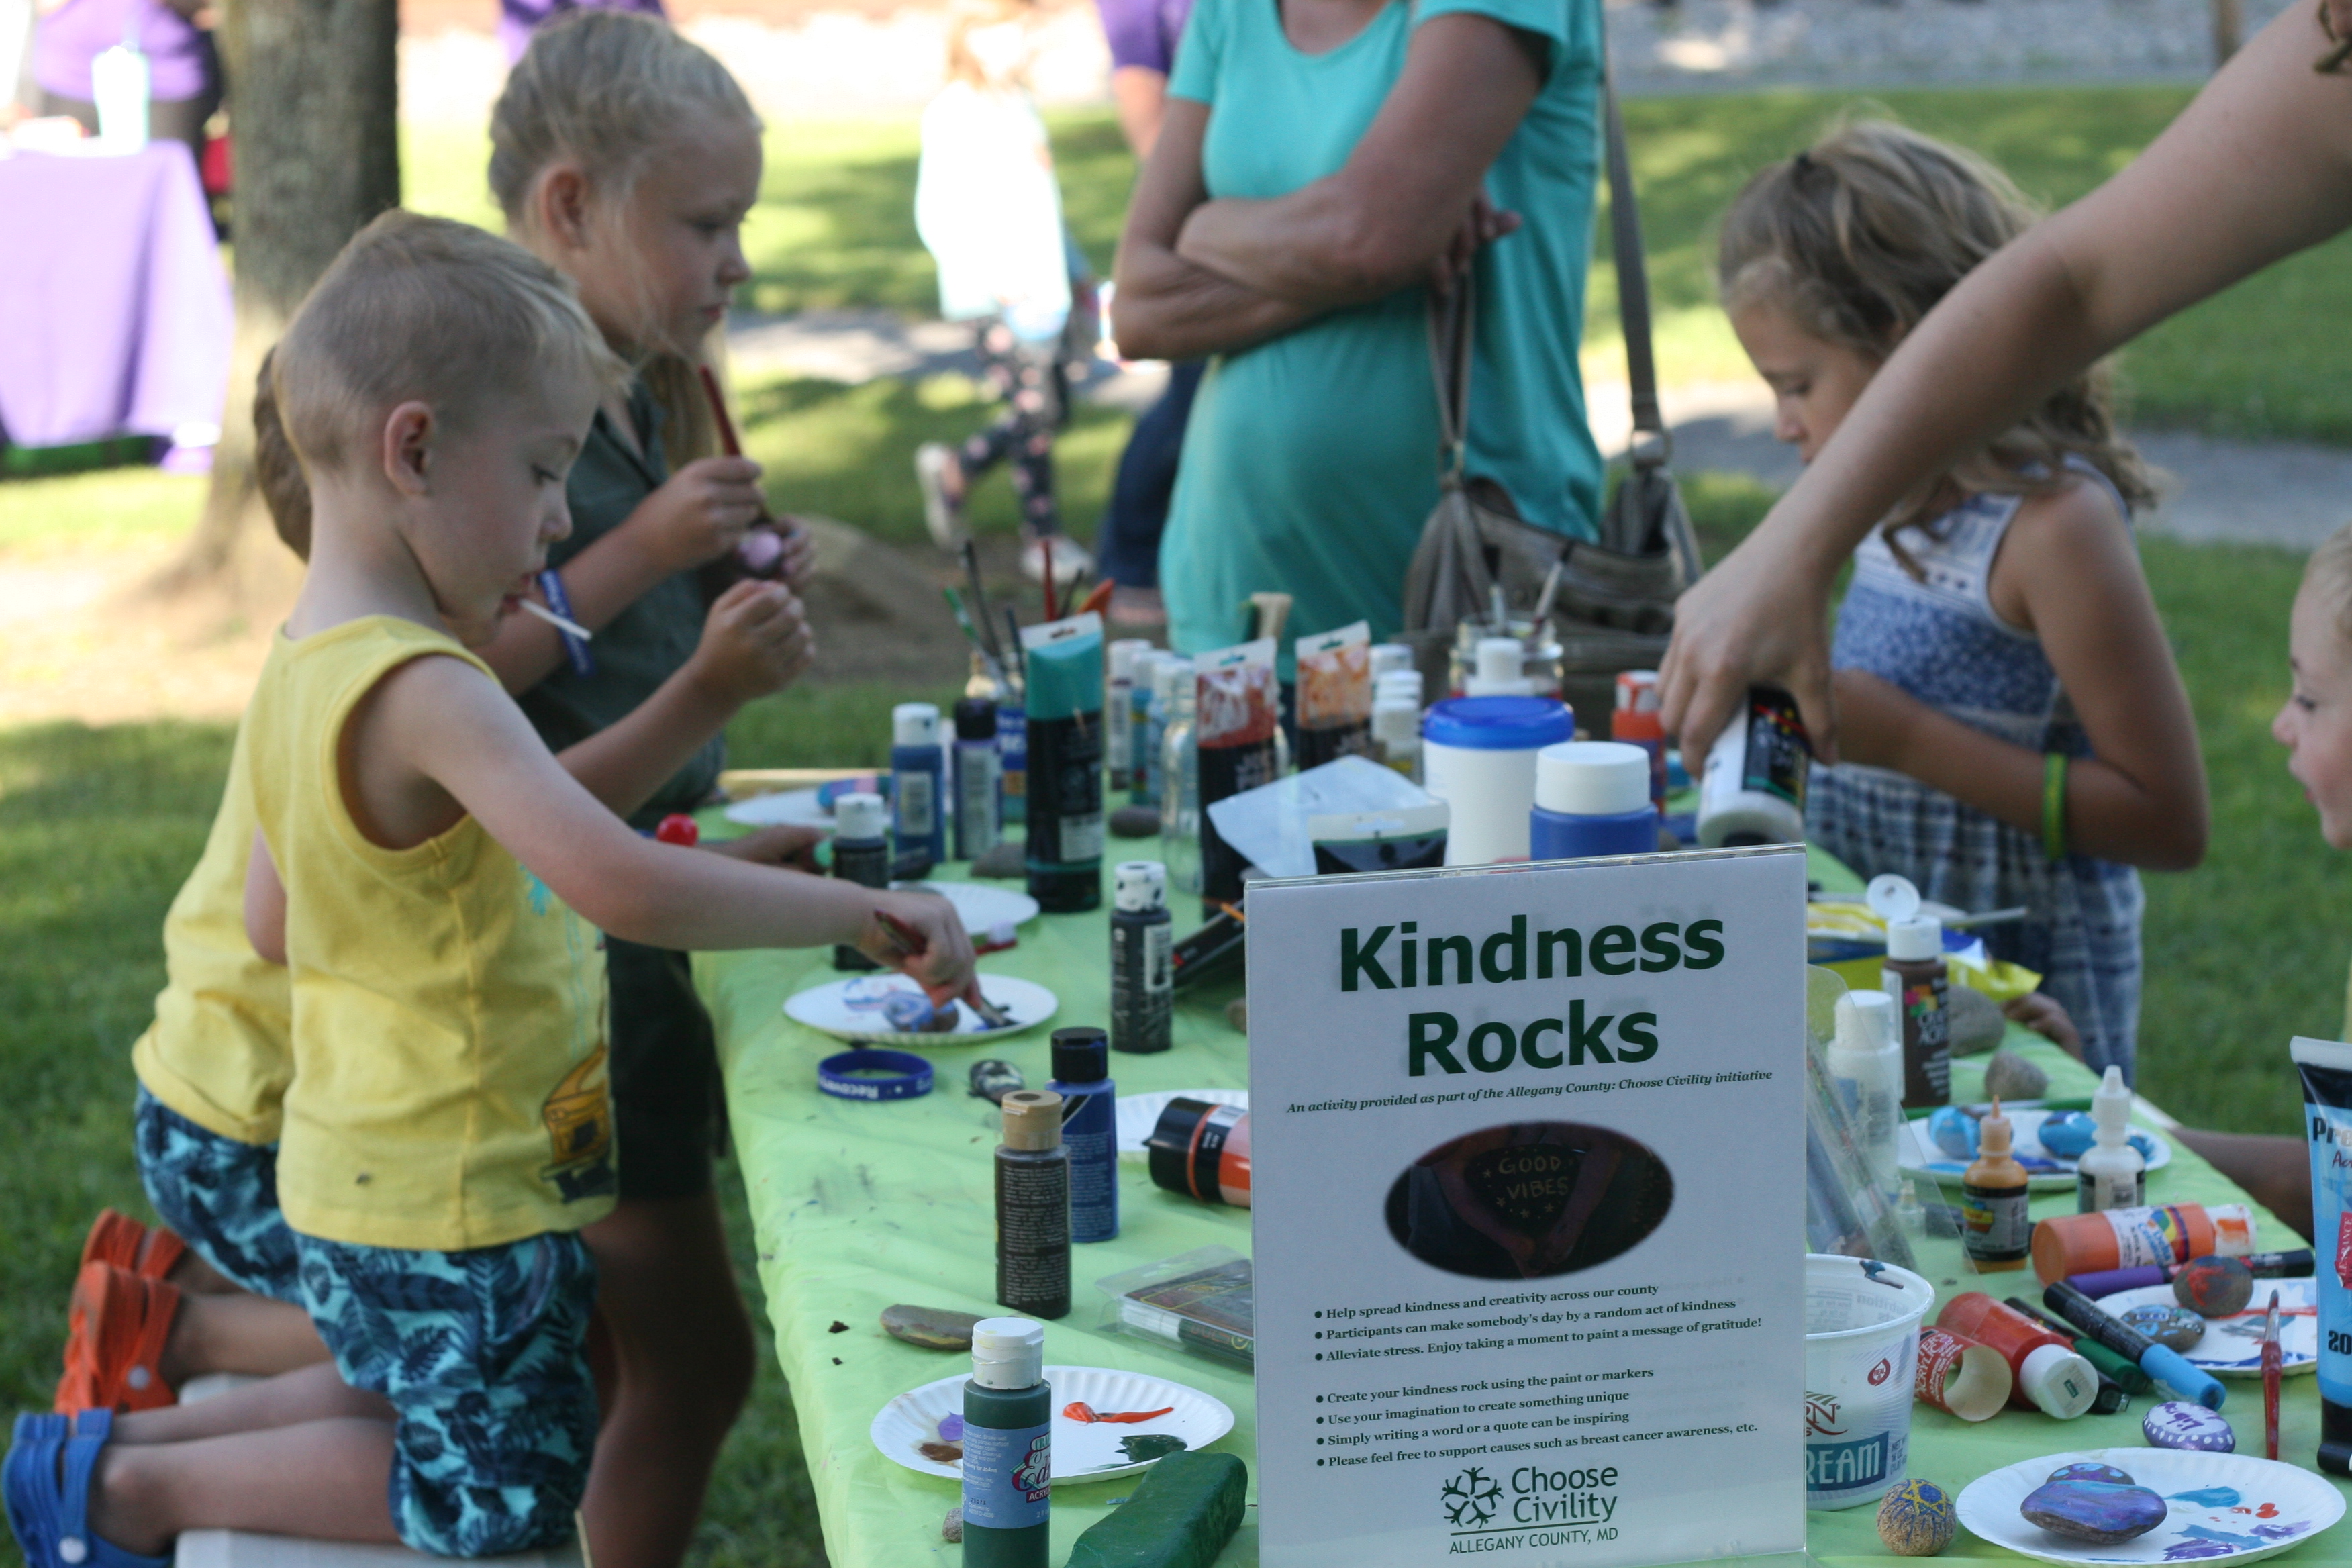 Table surrounded with kids and adults painting rocks. Sign labeled kindness rocks